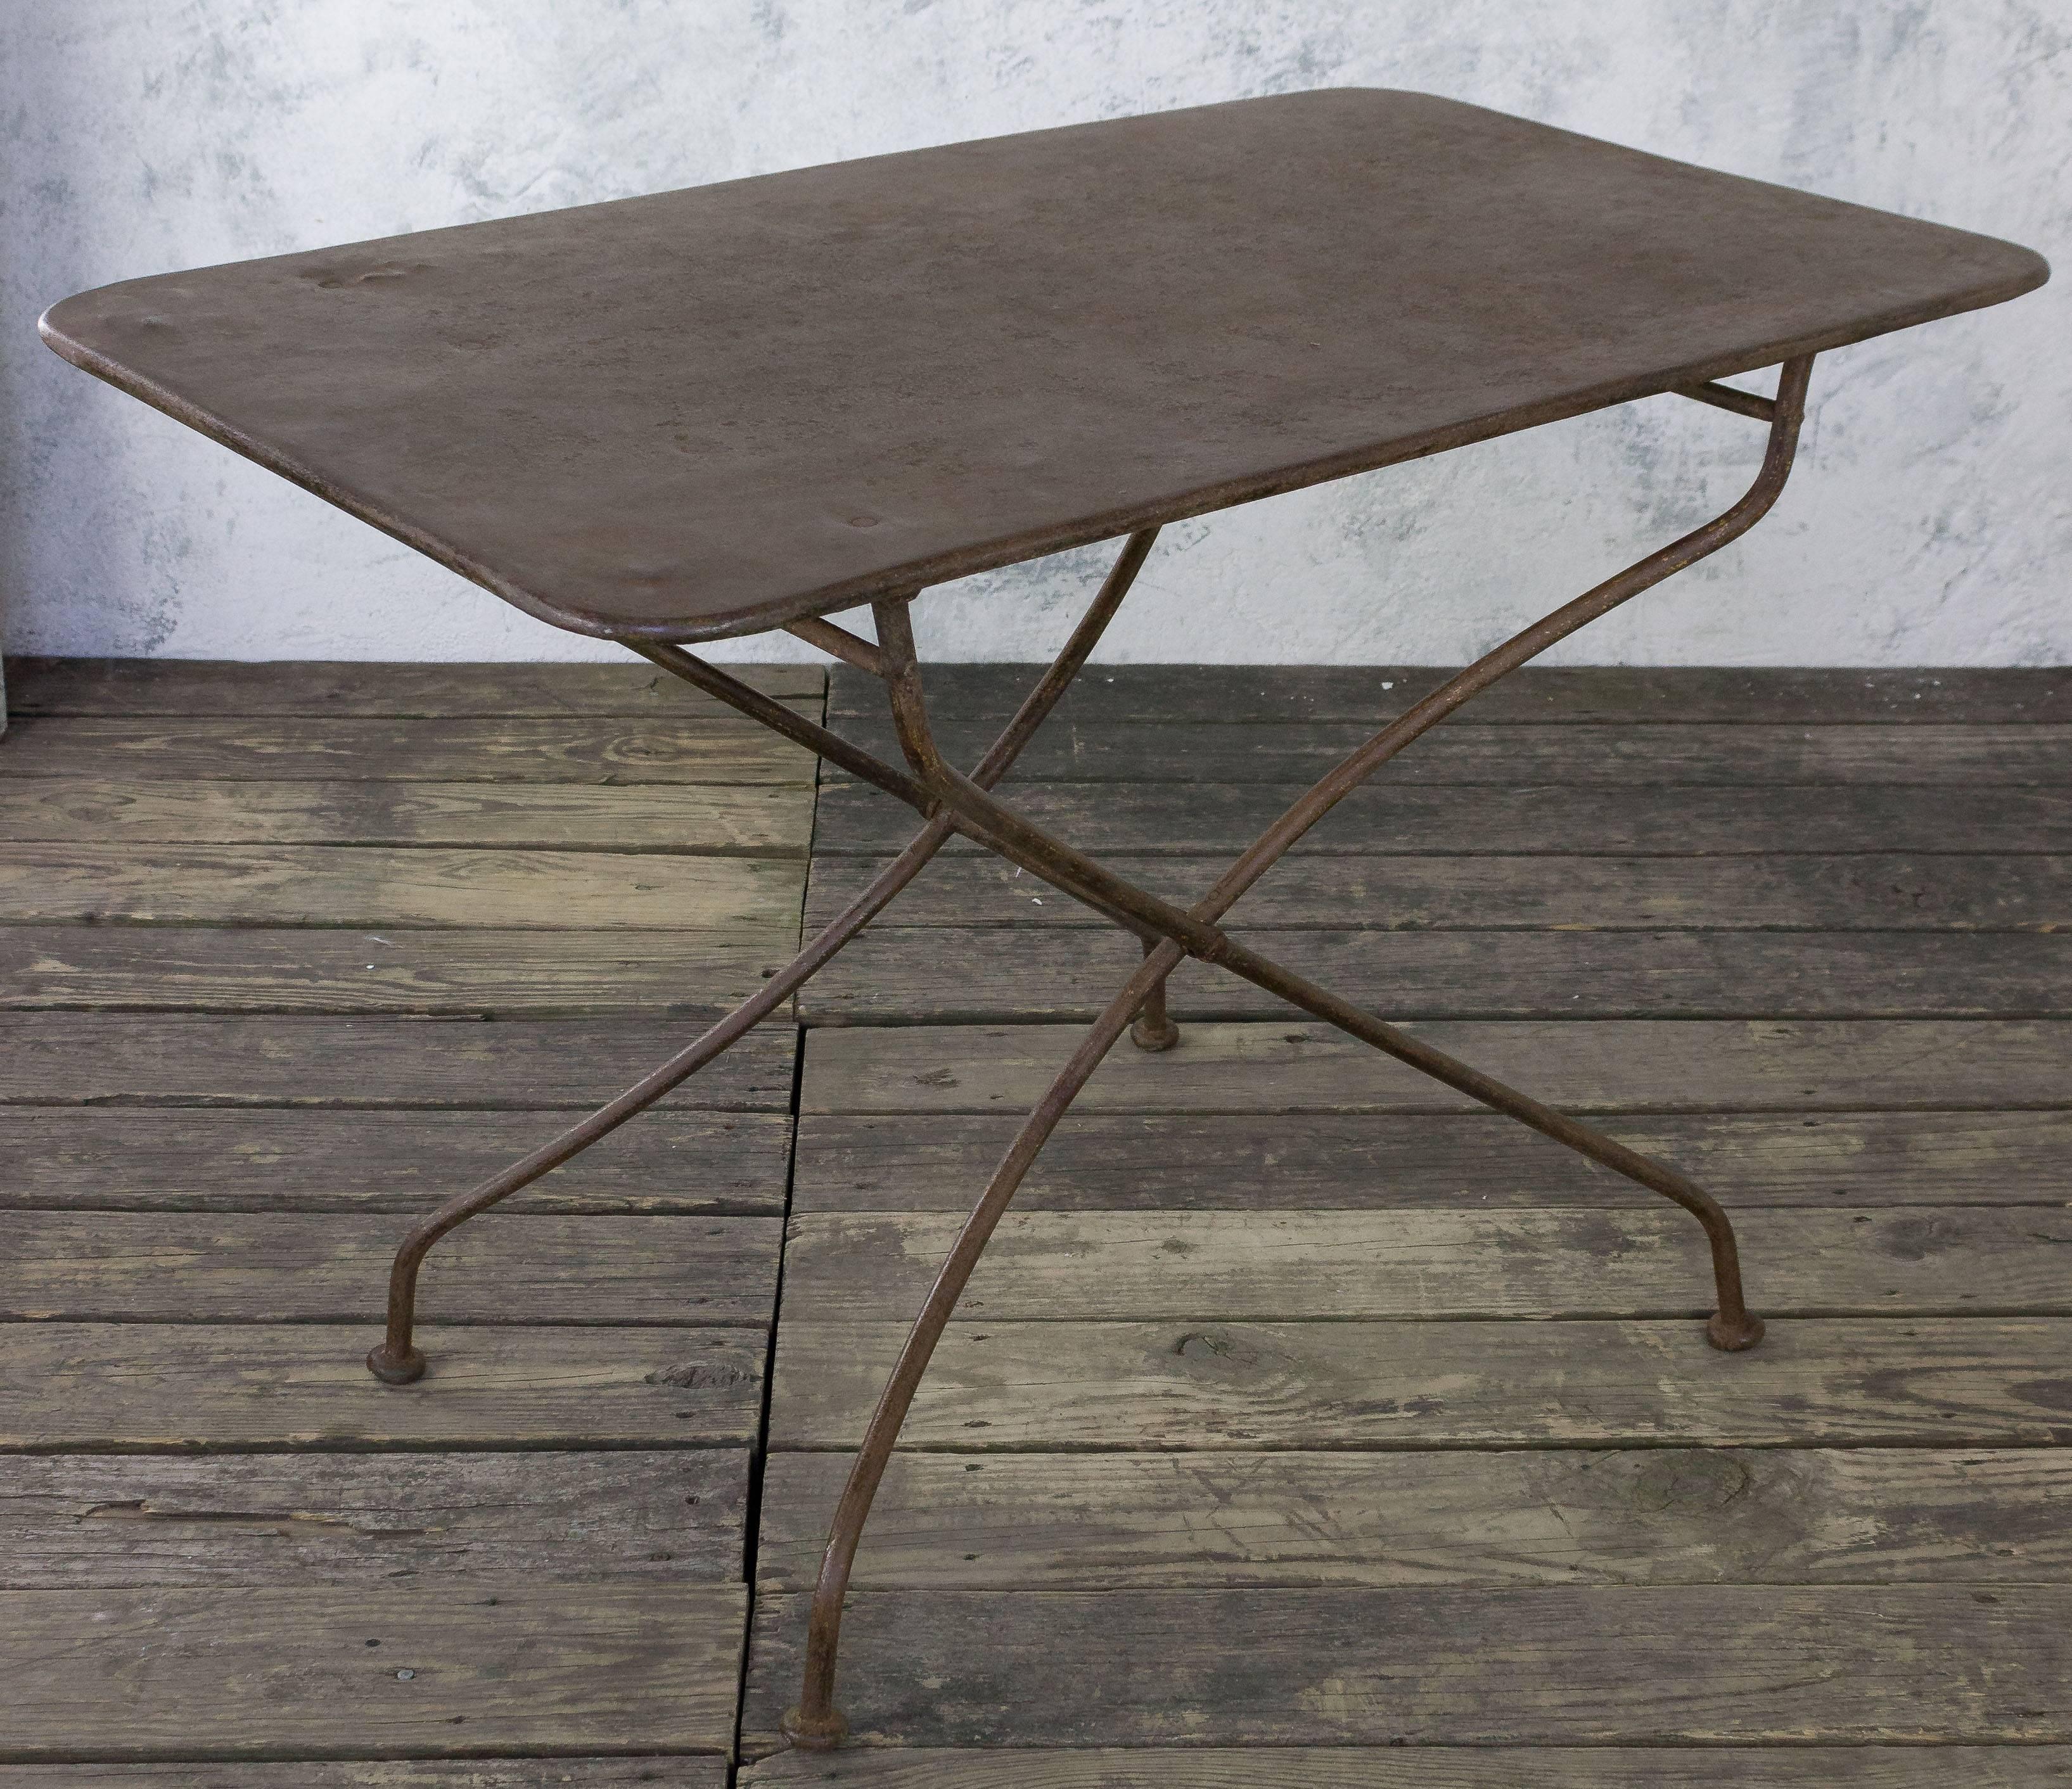 French garden table with nice old patina. The table folds for easy storage. Circa 1920

This price of this item has been reduced. This is the final net price.

 